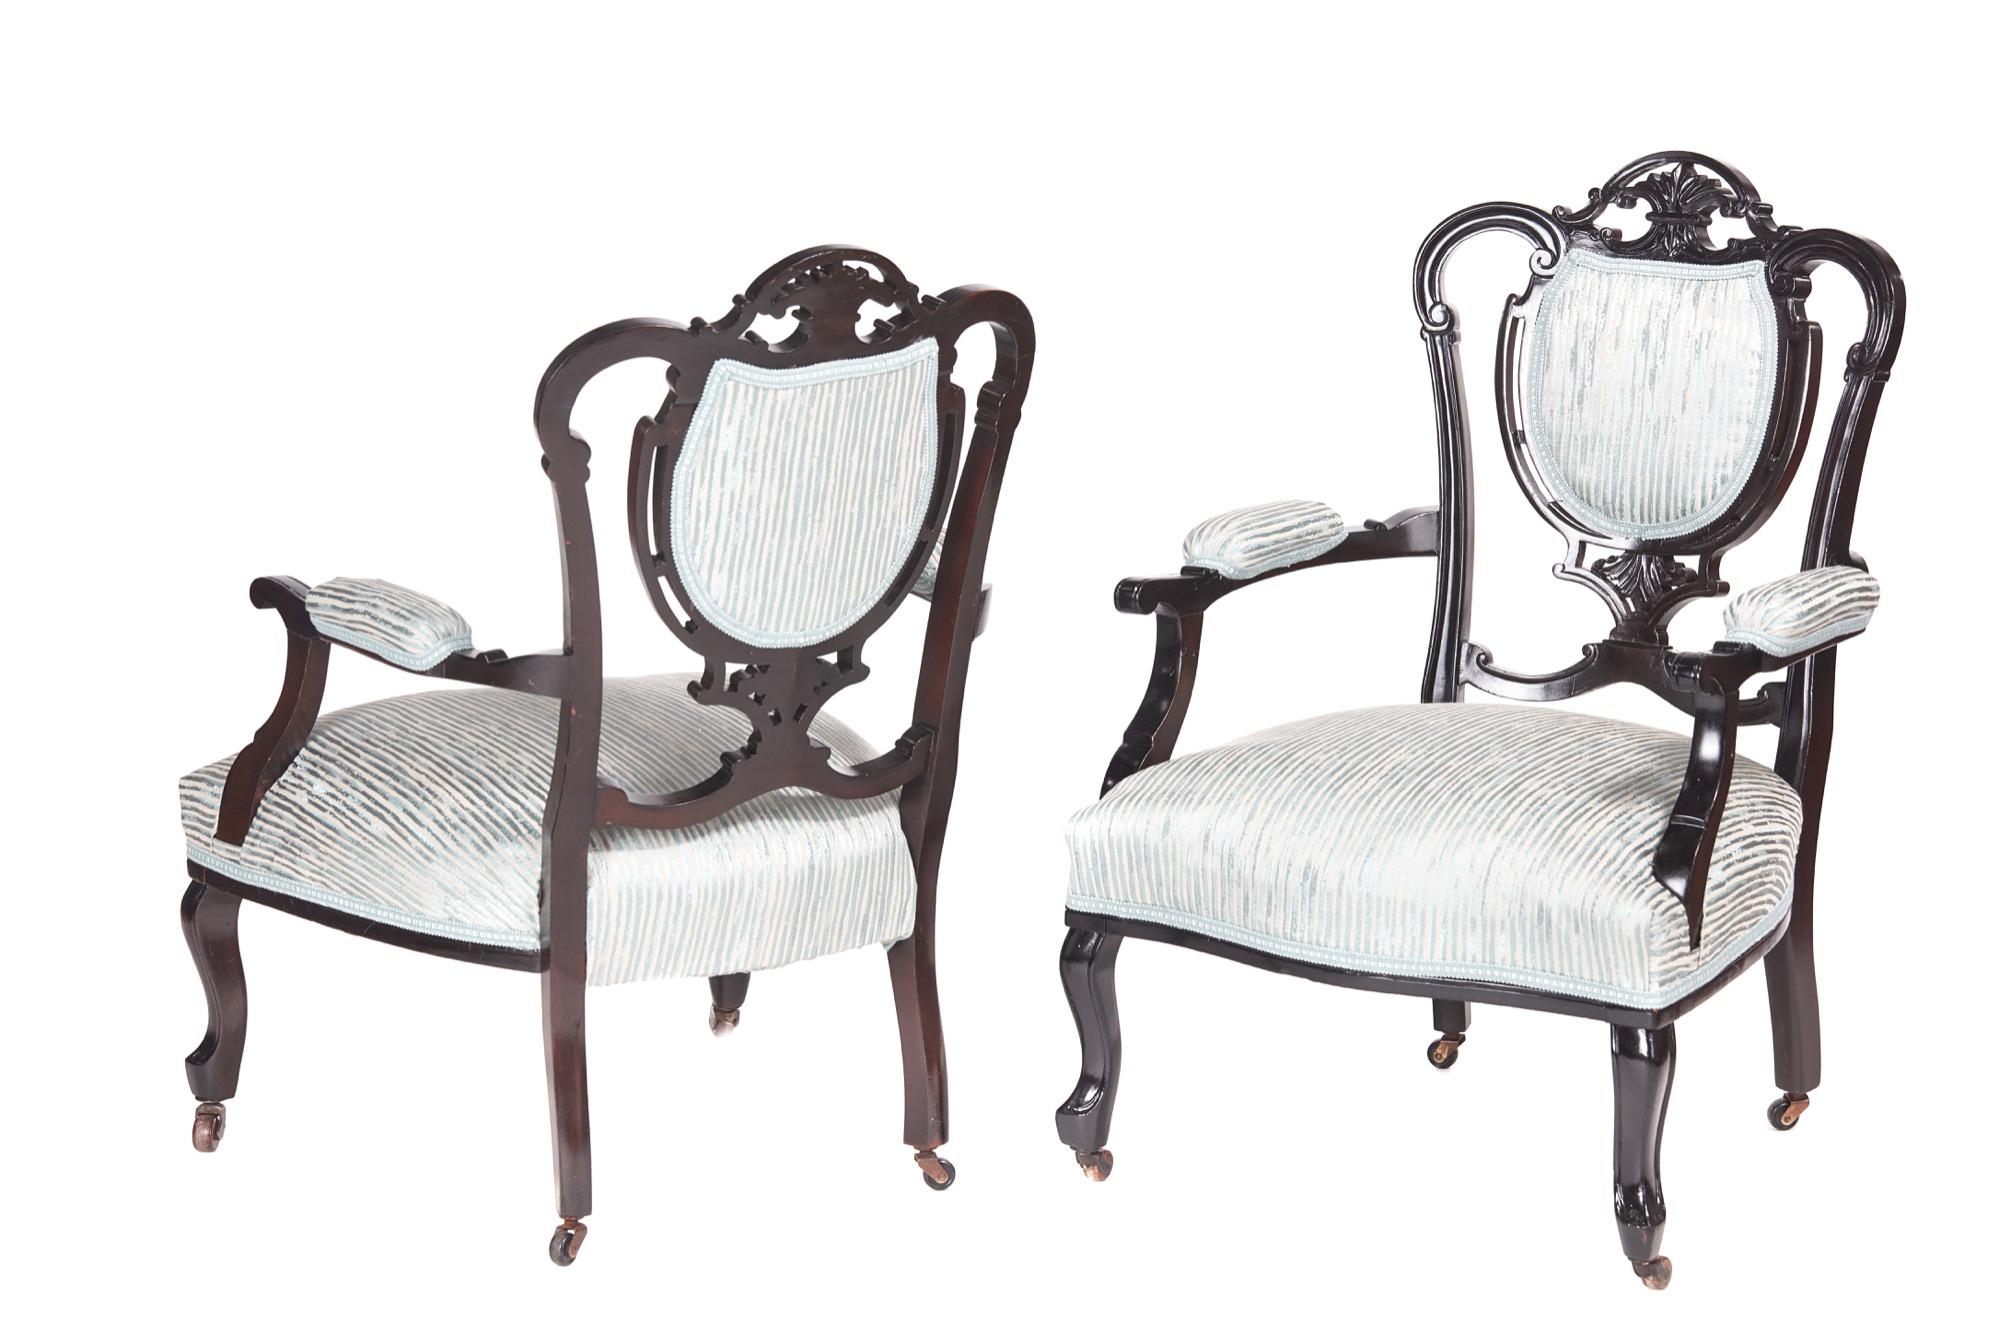 Pair of antique 19th century Victorian carved black lacquered library chairs, with lovely carved and shaped backs, shaped open arms, standing on cabriole legs to the front and out-swept legs to the rear. They have the original castors and have been